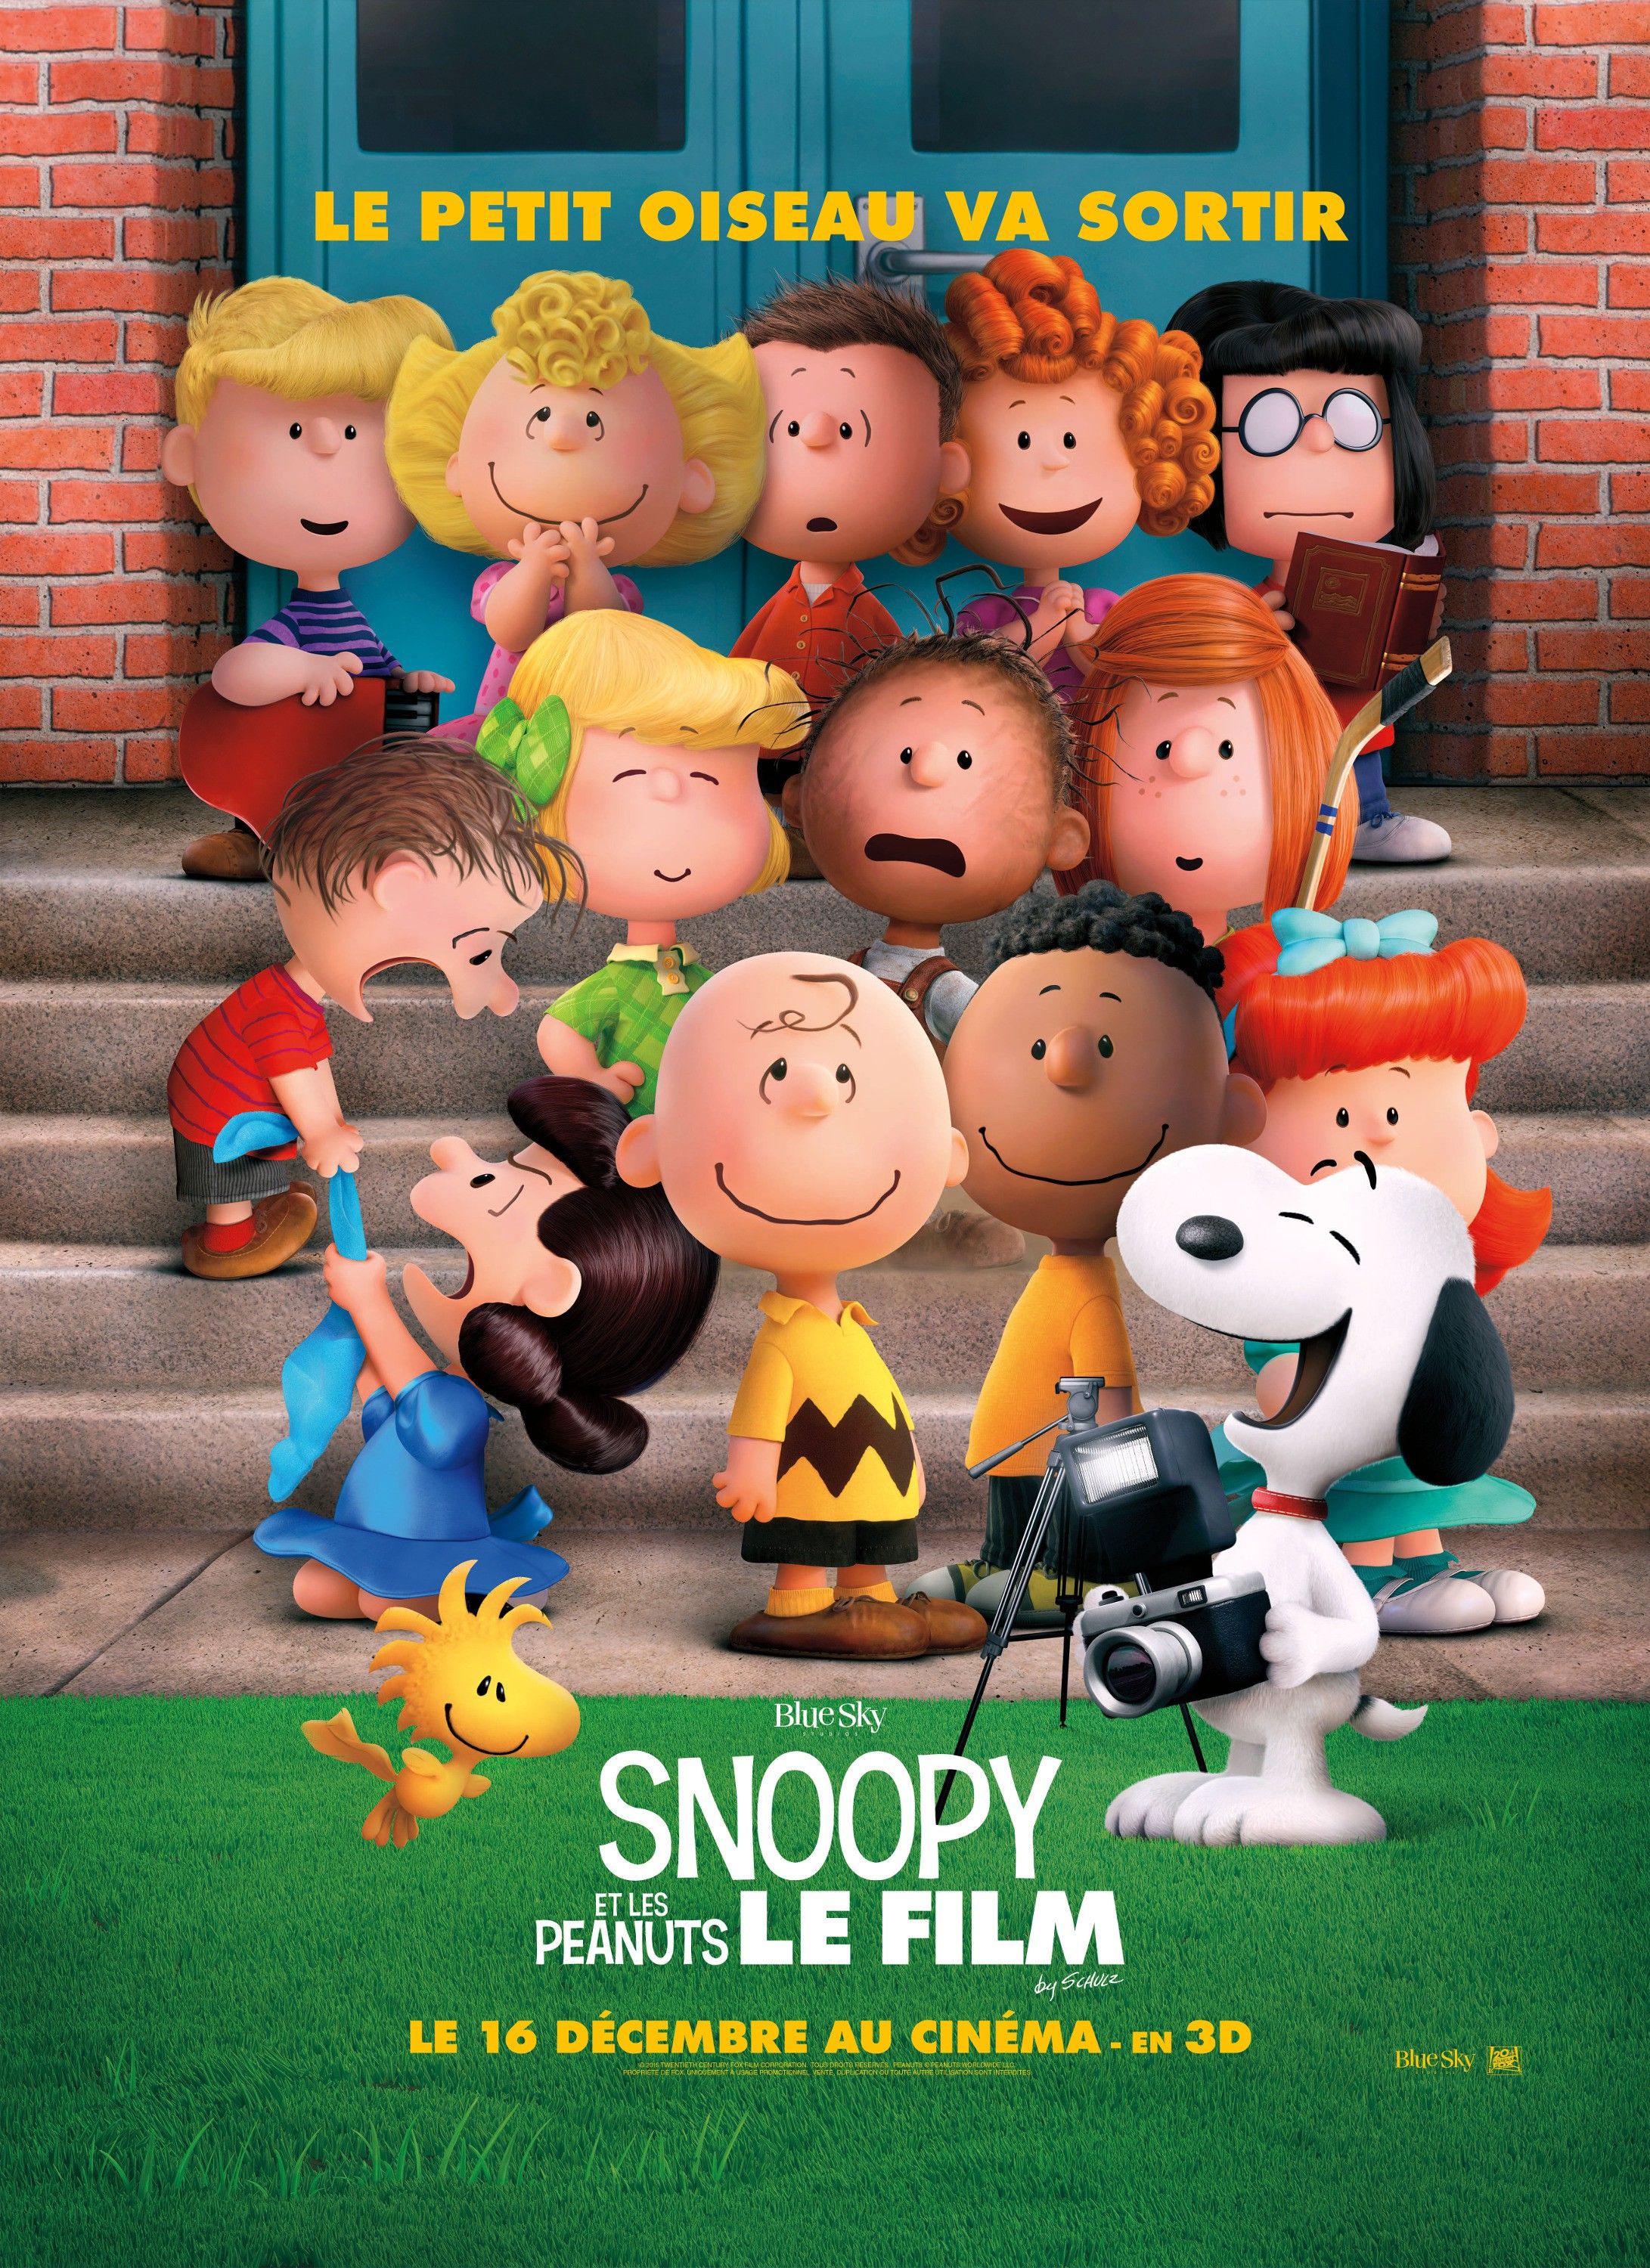 Snoopy and Charlie Brown: The Peanuts Movie Poster 25. GoldPoster. Snoopy wallpaper, Charlie brown, Snoopy